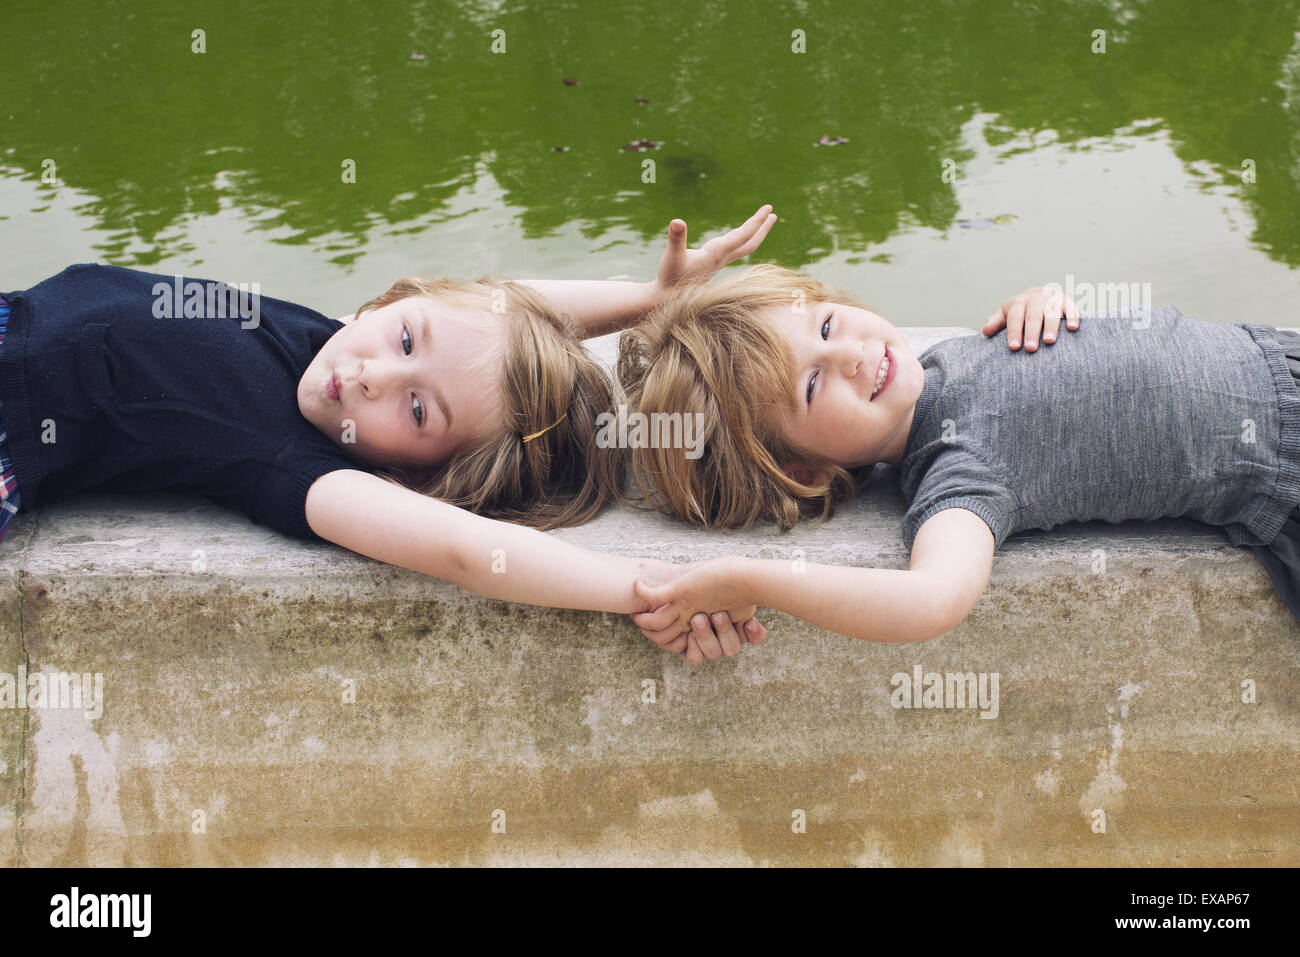 Little girls lying together beside pond, holding hands Stock Photo